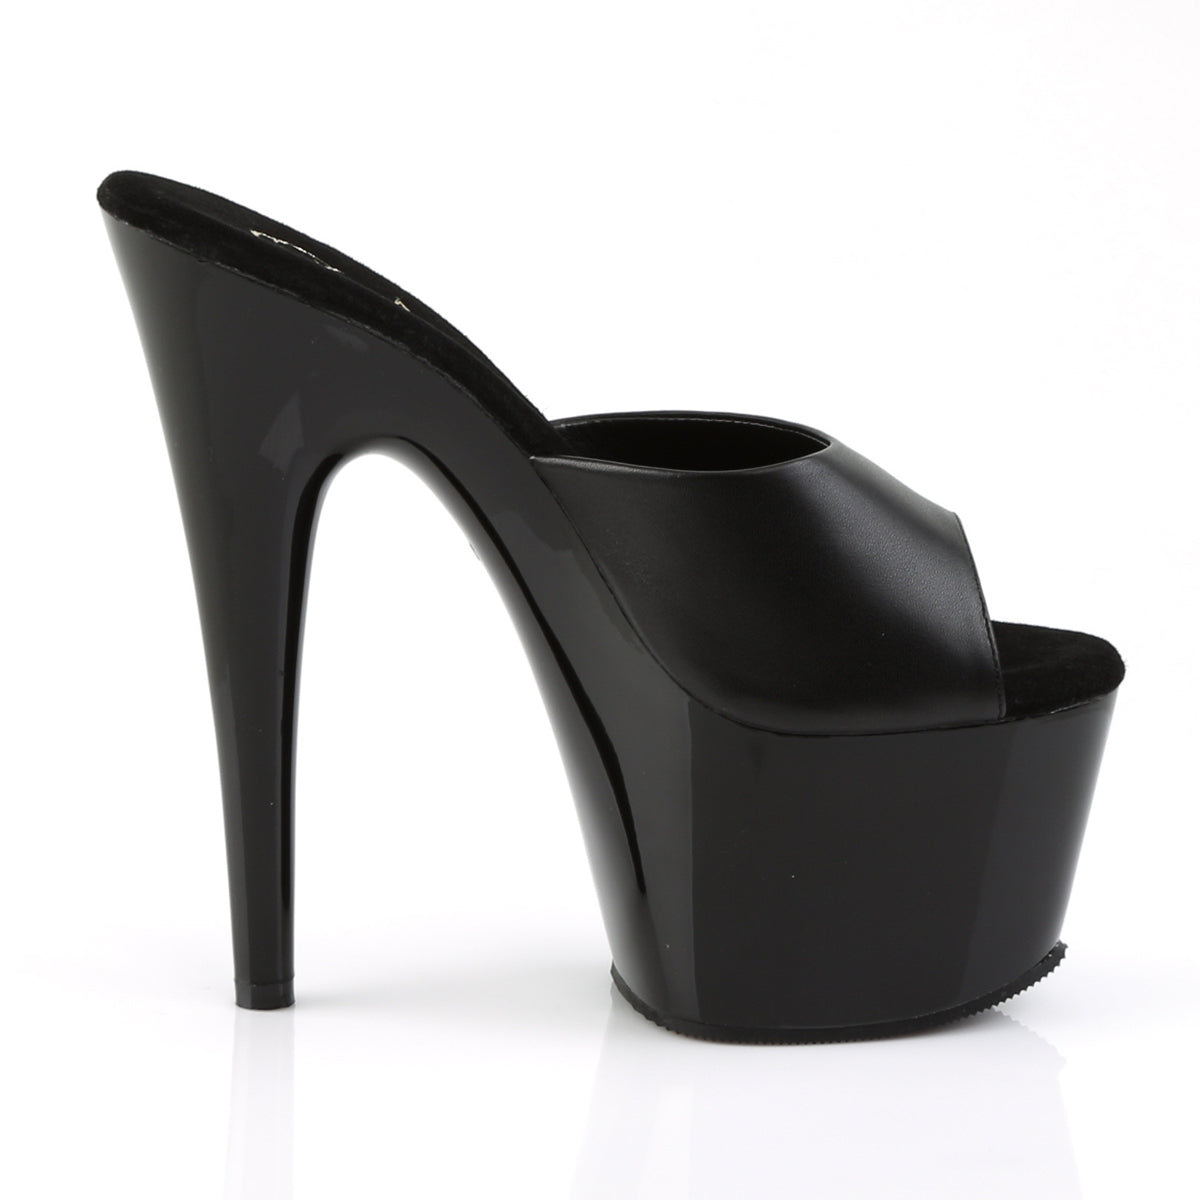 ADORE-701 Sexy 7" Heel Black Leather Sexy Sandals-Pleaser- Sexy Shoes Fetish Heels